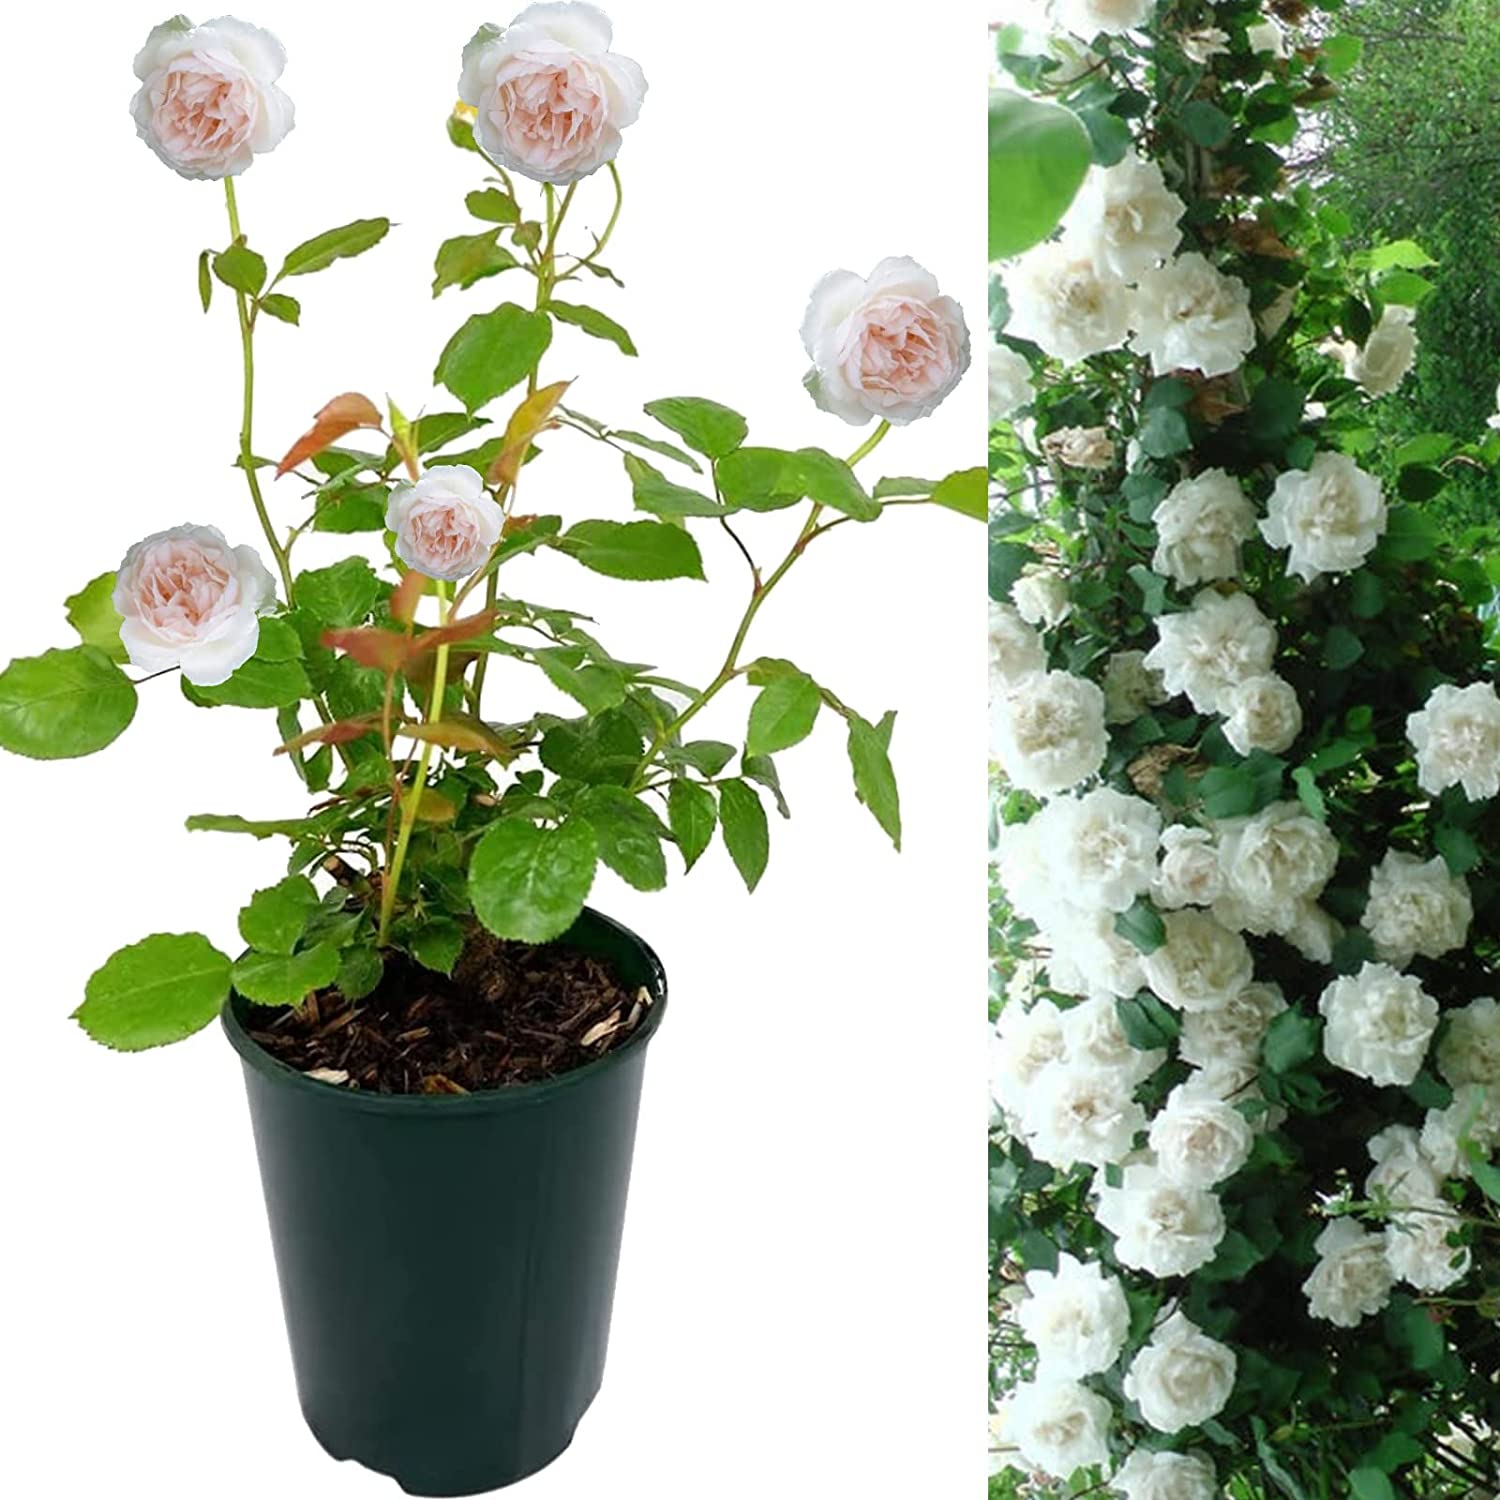 Image of Madame Alfred Carriere rose bush